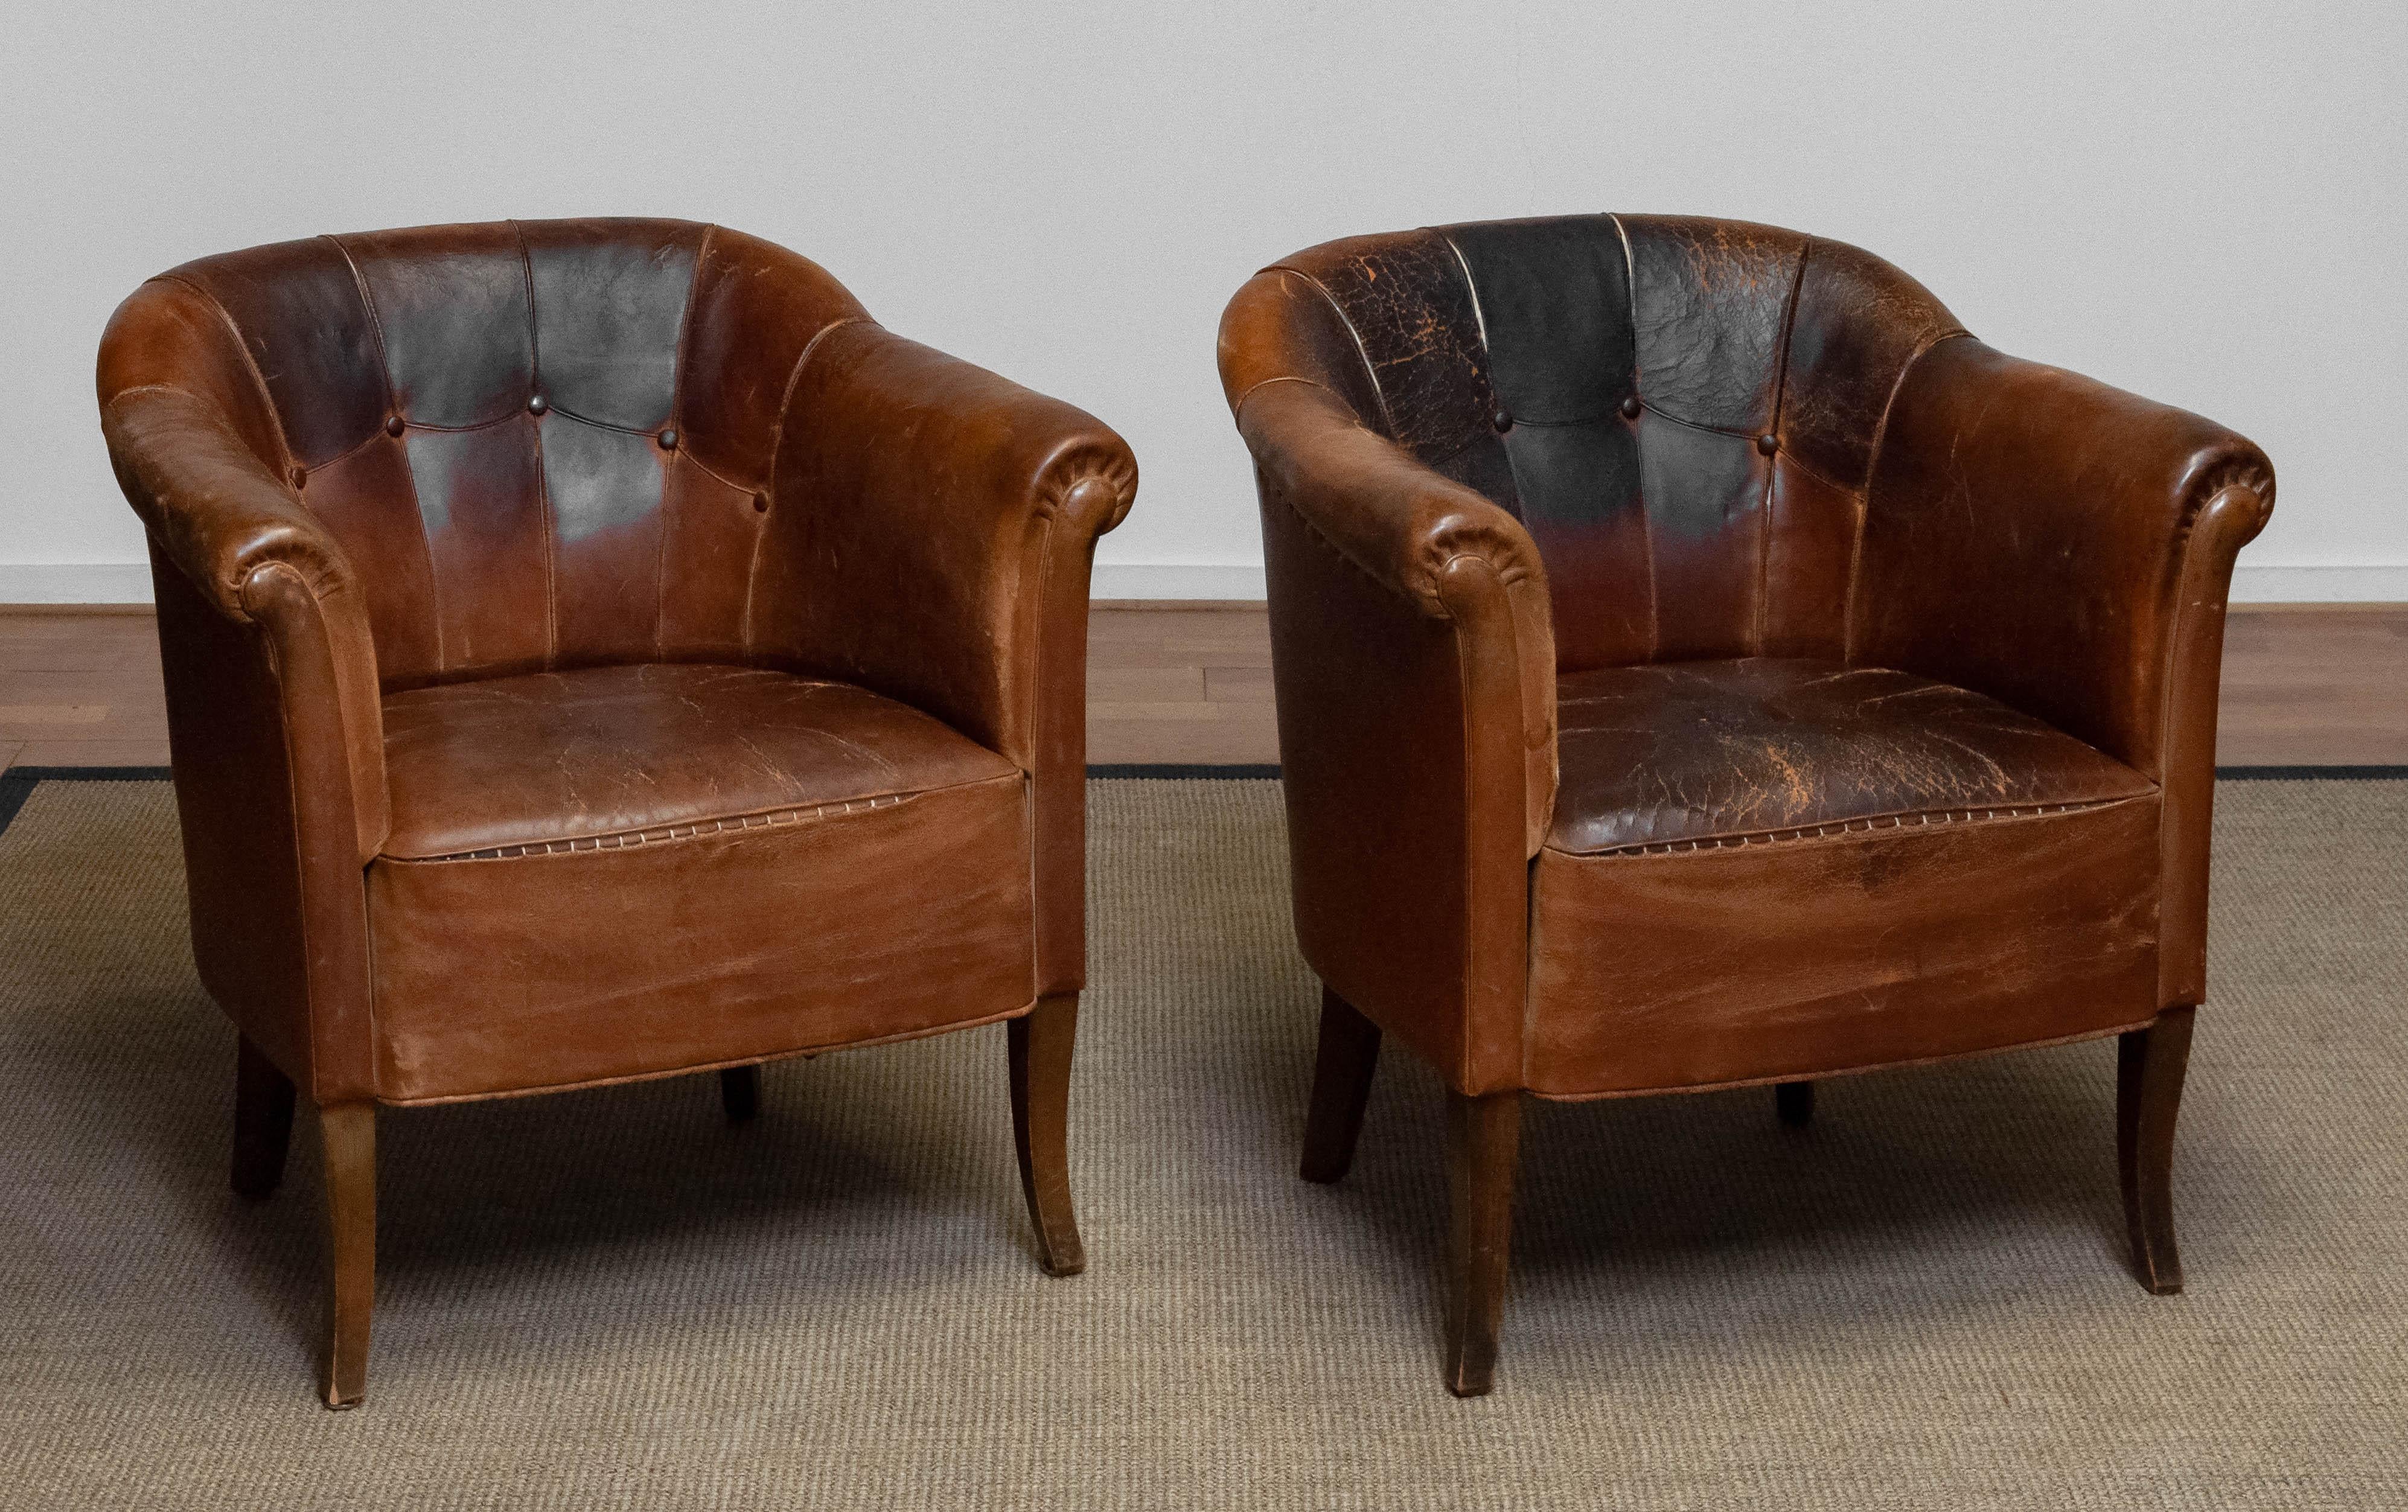 Chesterfield Pair Late 19th Century Swedish Tan / Brown Nailed Leather Lounge / Club Chairs